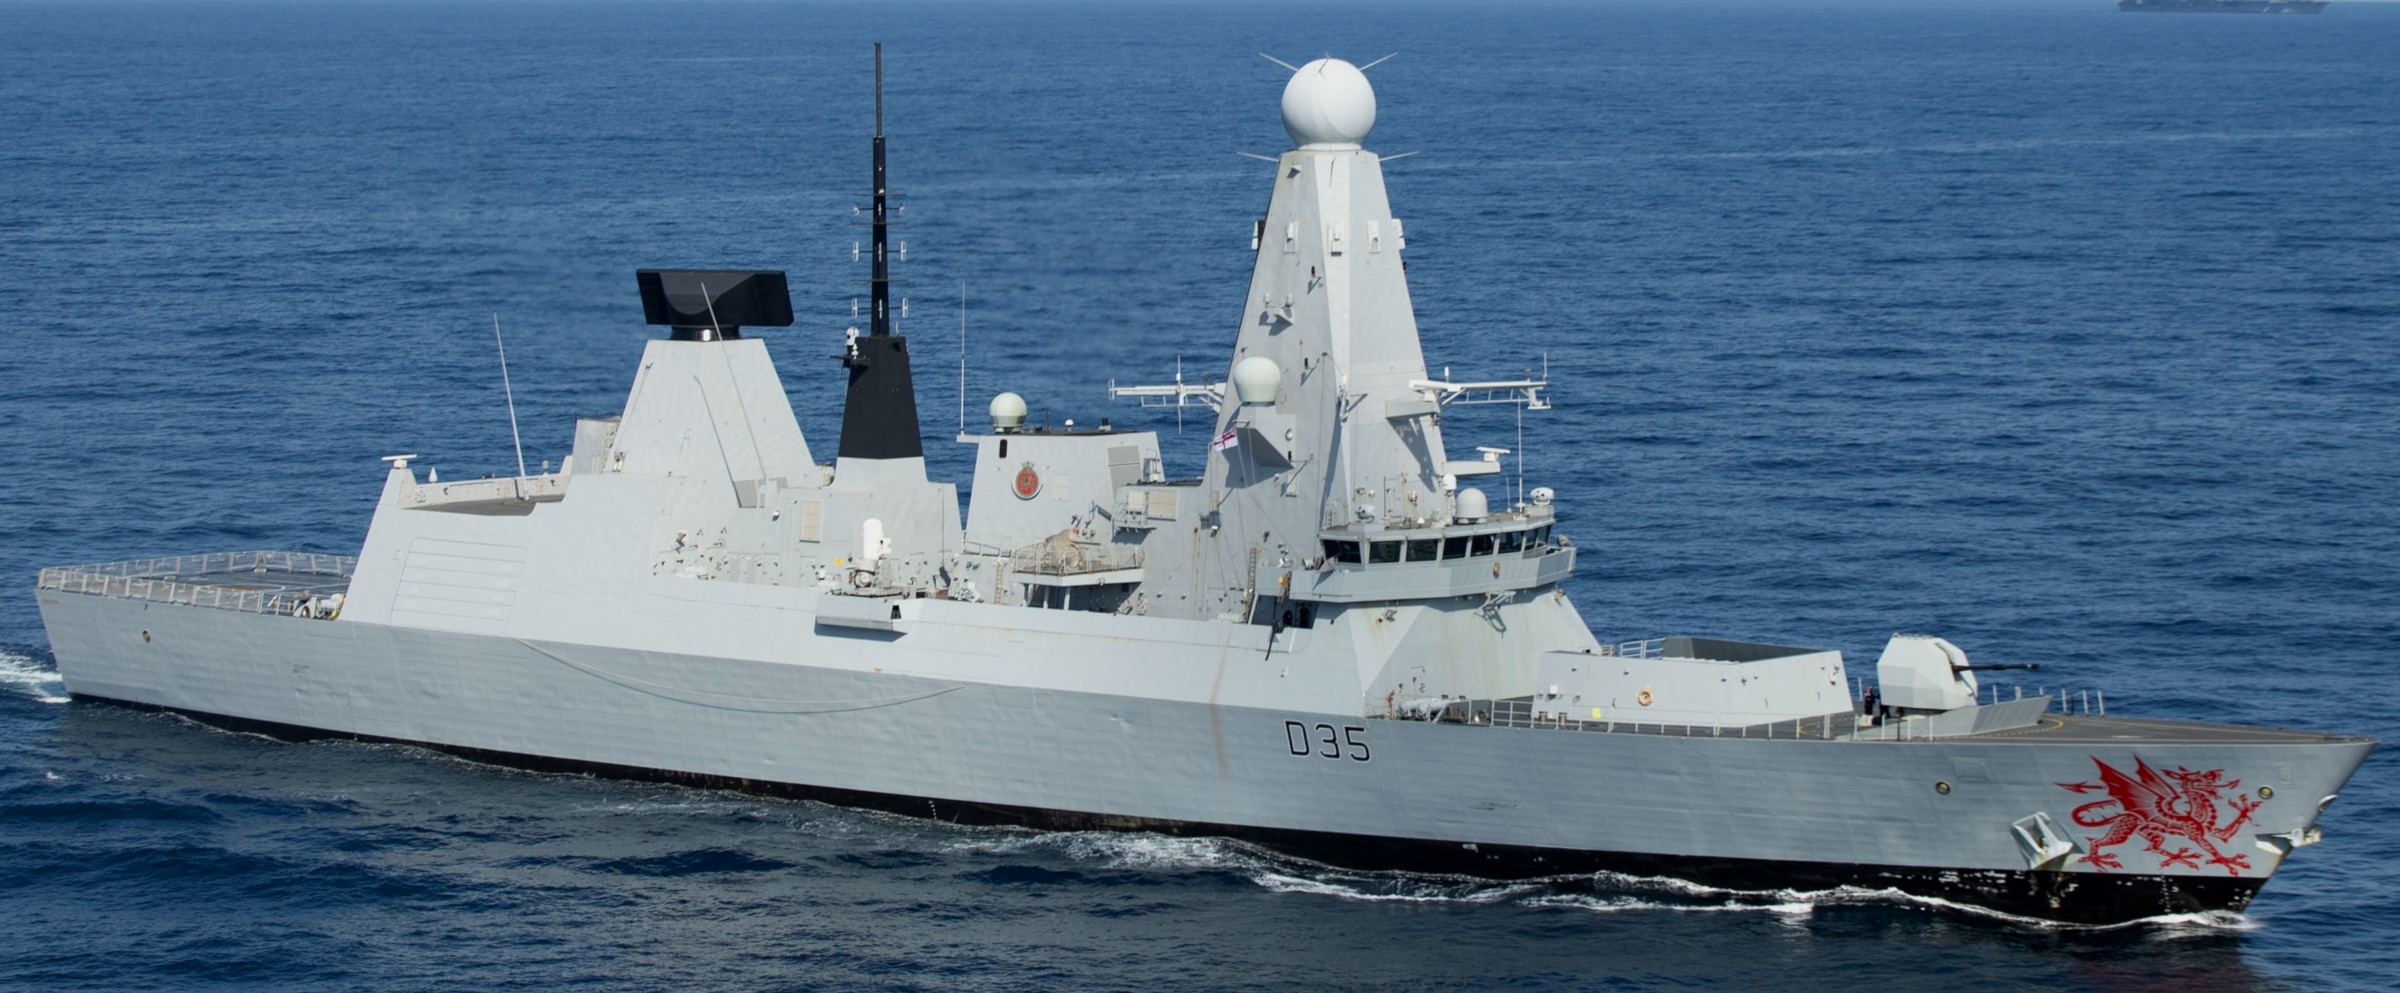 hms dragon d-35 type 45 daring class guided missile destroyer ddg royal navy sea viper paams 31